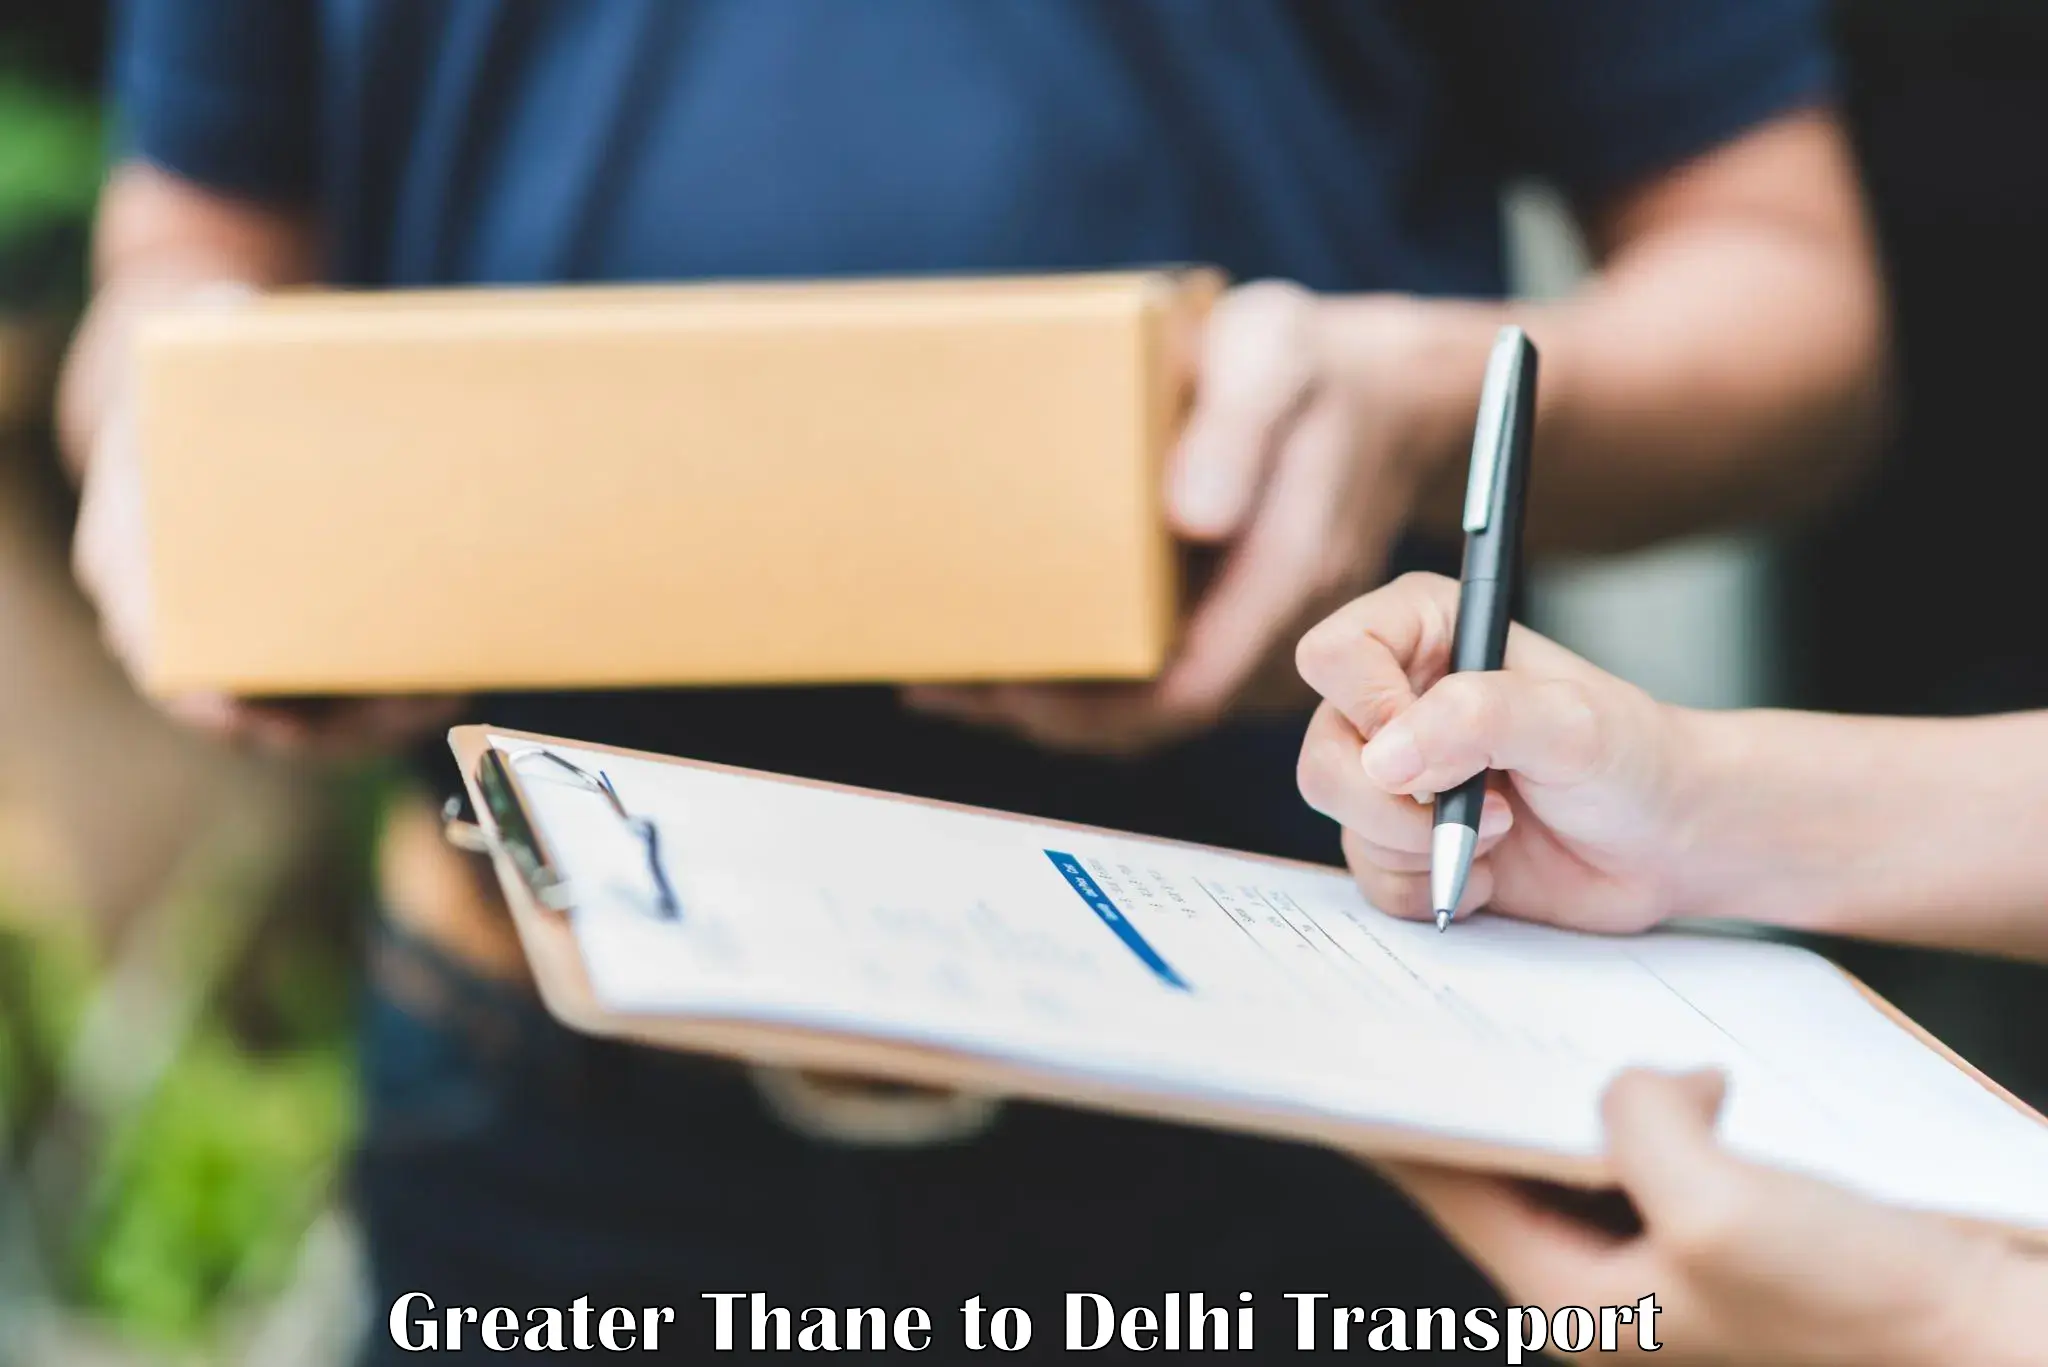 Goods delivery service Greater Thane to Delhi